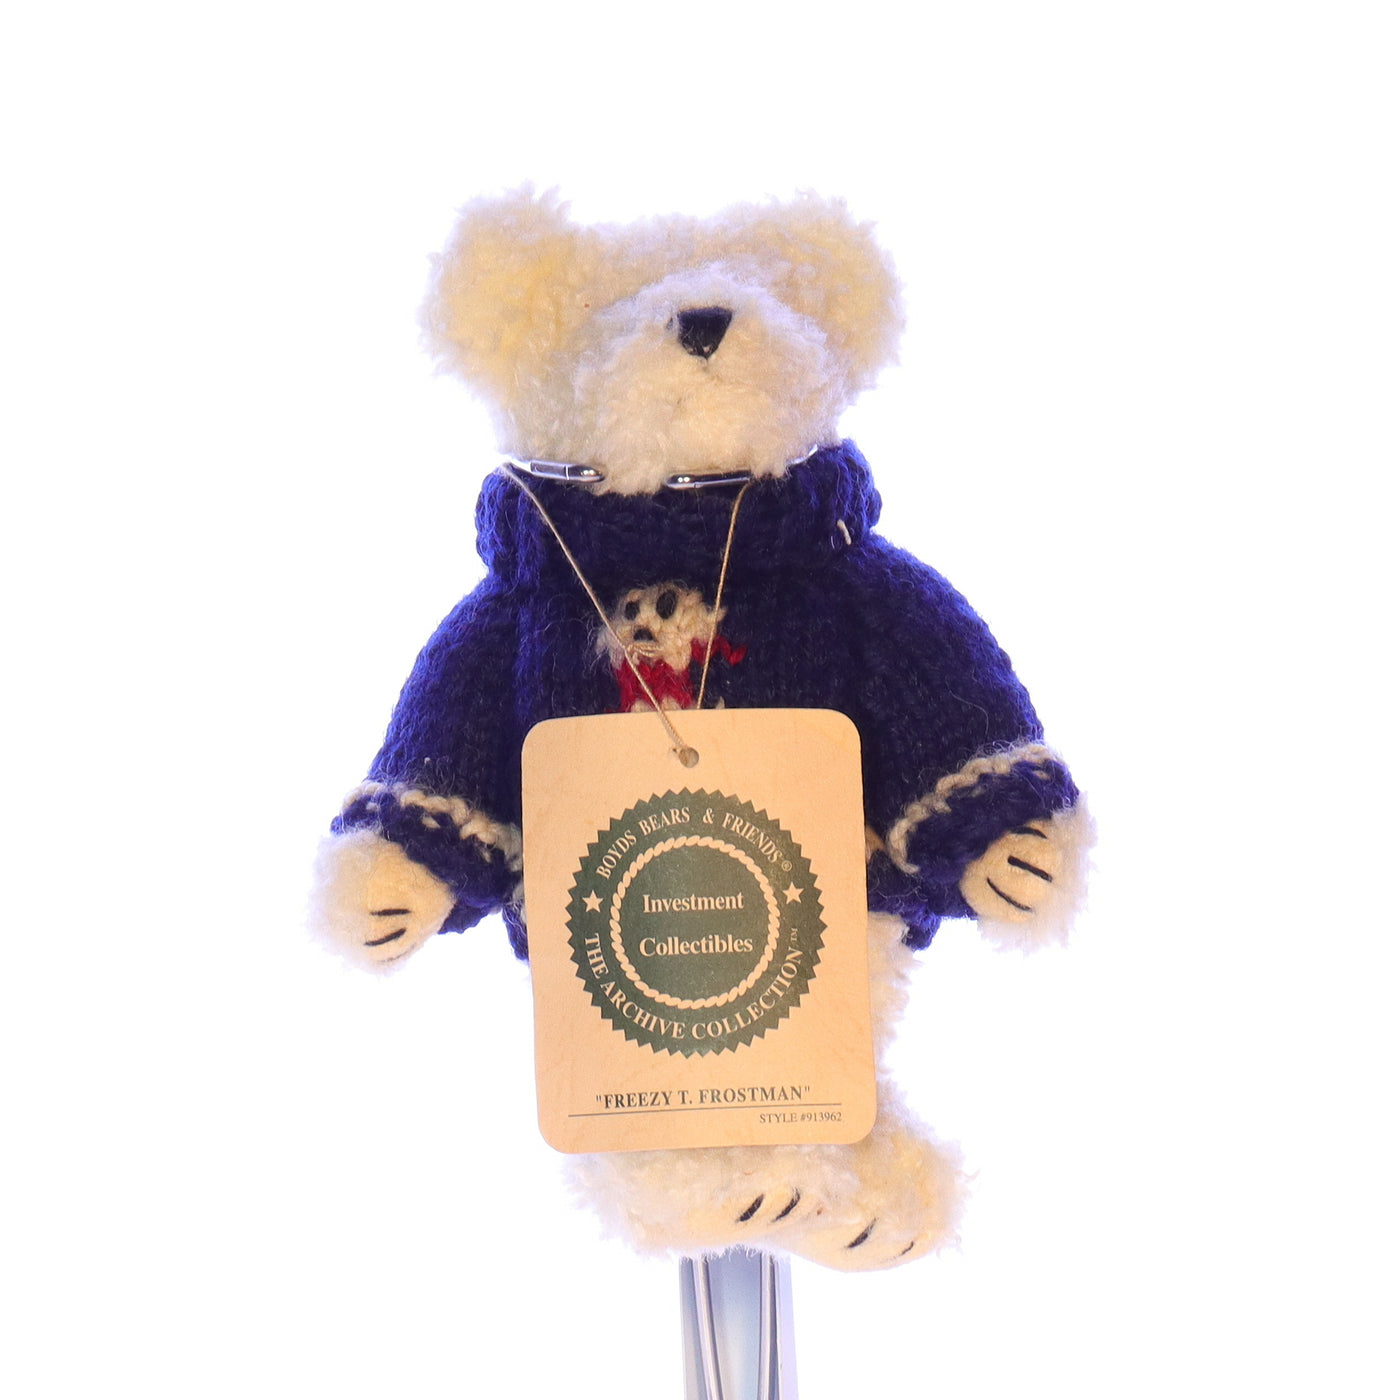 Boyds_Bears_and_Friends_913962_Freezy_T_Frostman_Christmas_Stuffed_Animal_1990 Front View